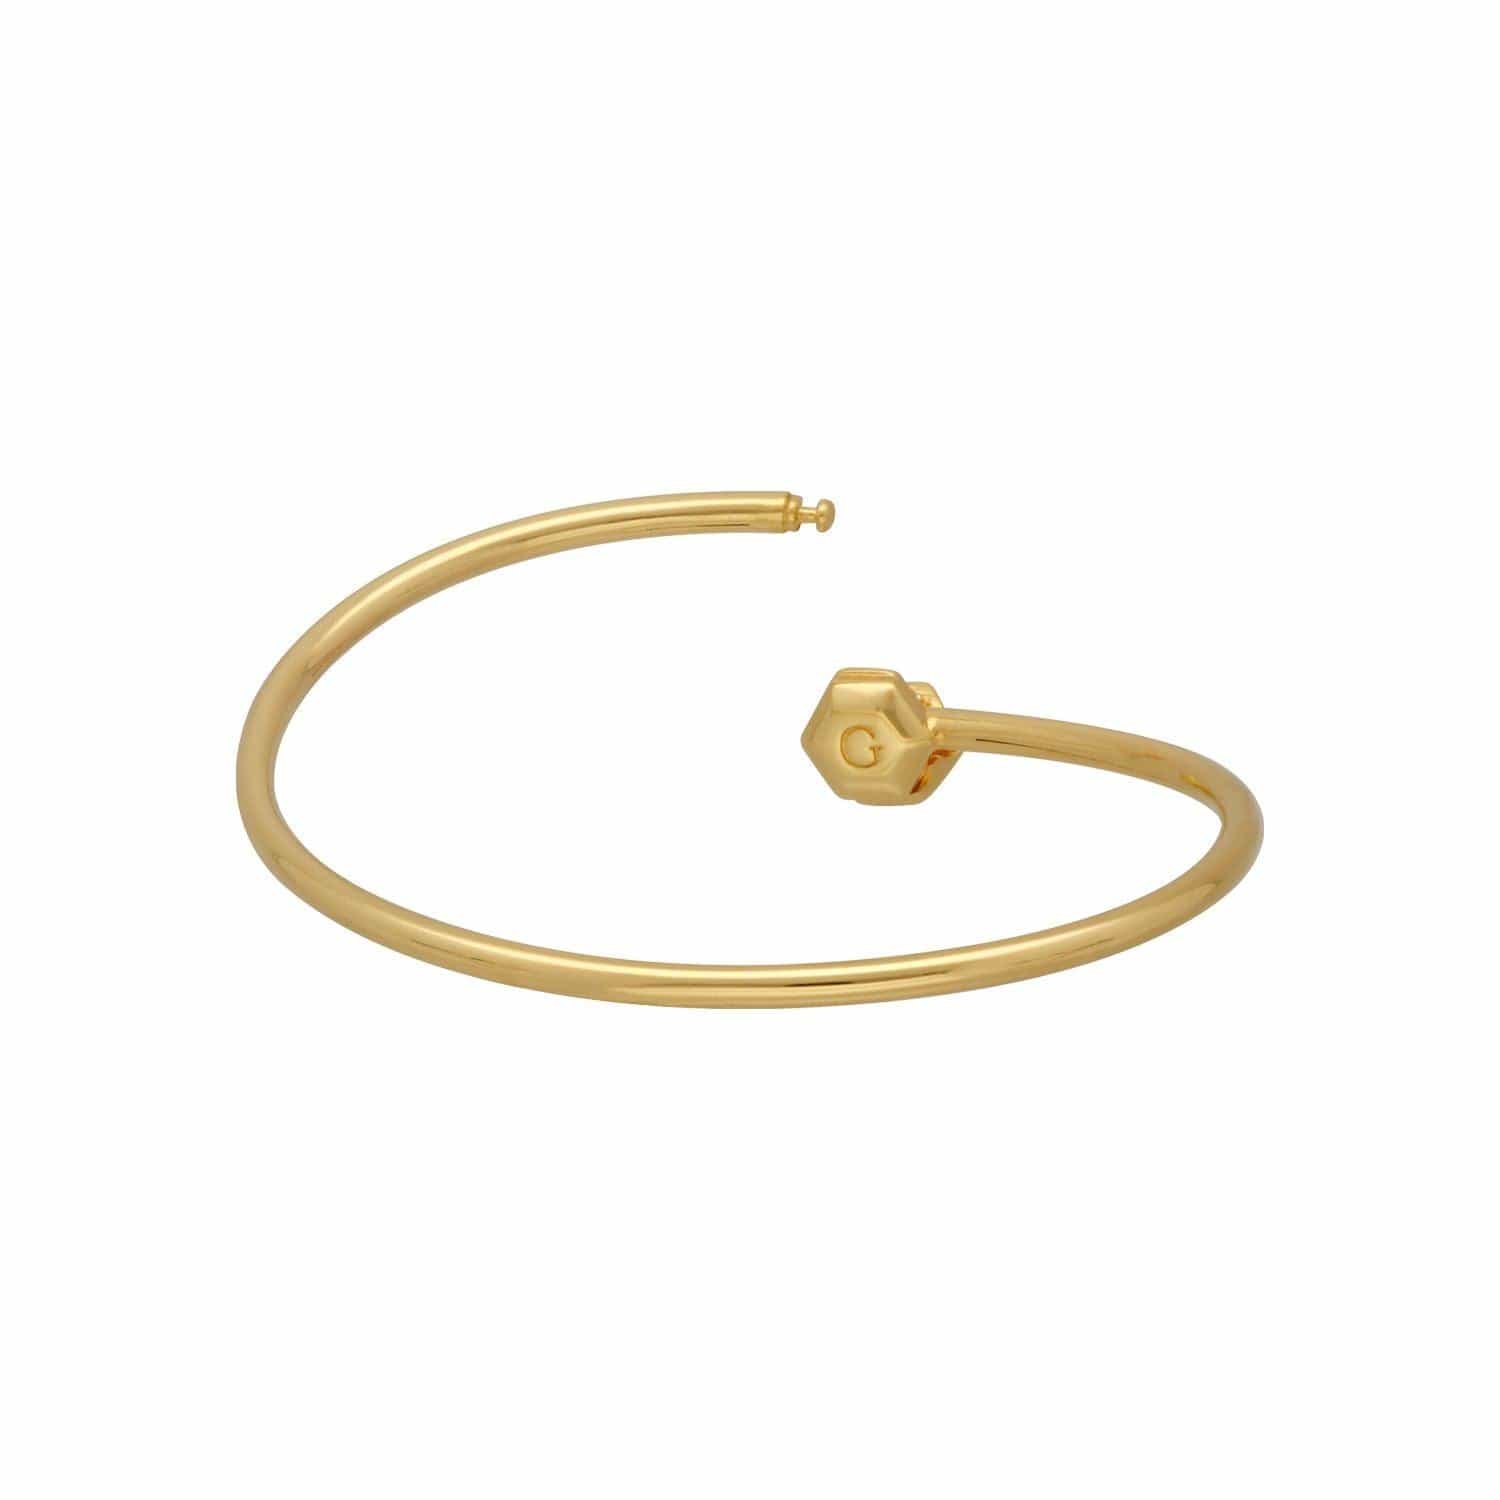 HS Achievement Bangle in gold plated sterling silver size large 2